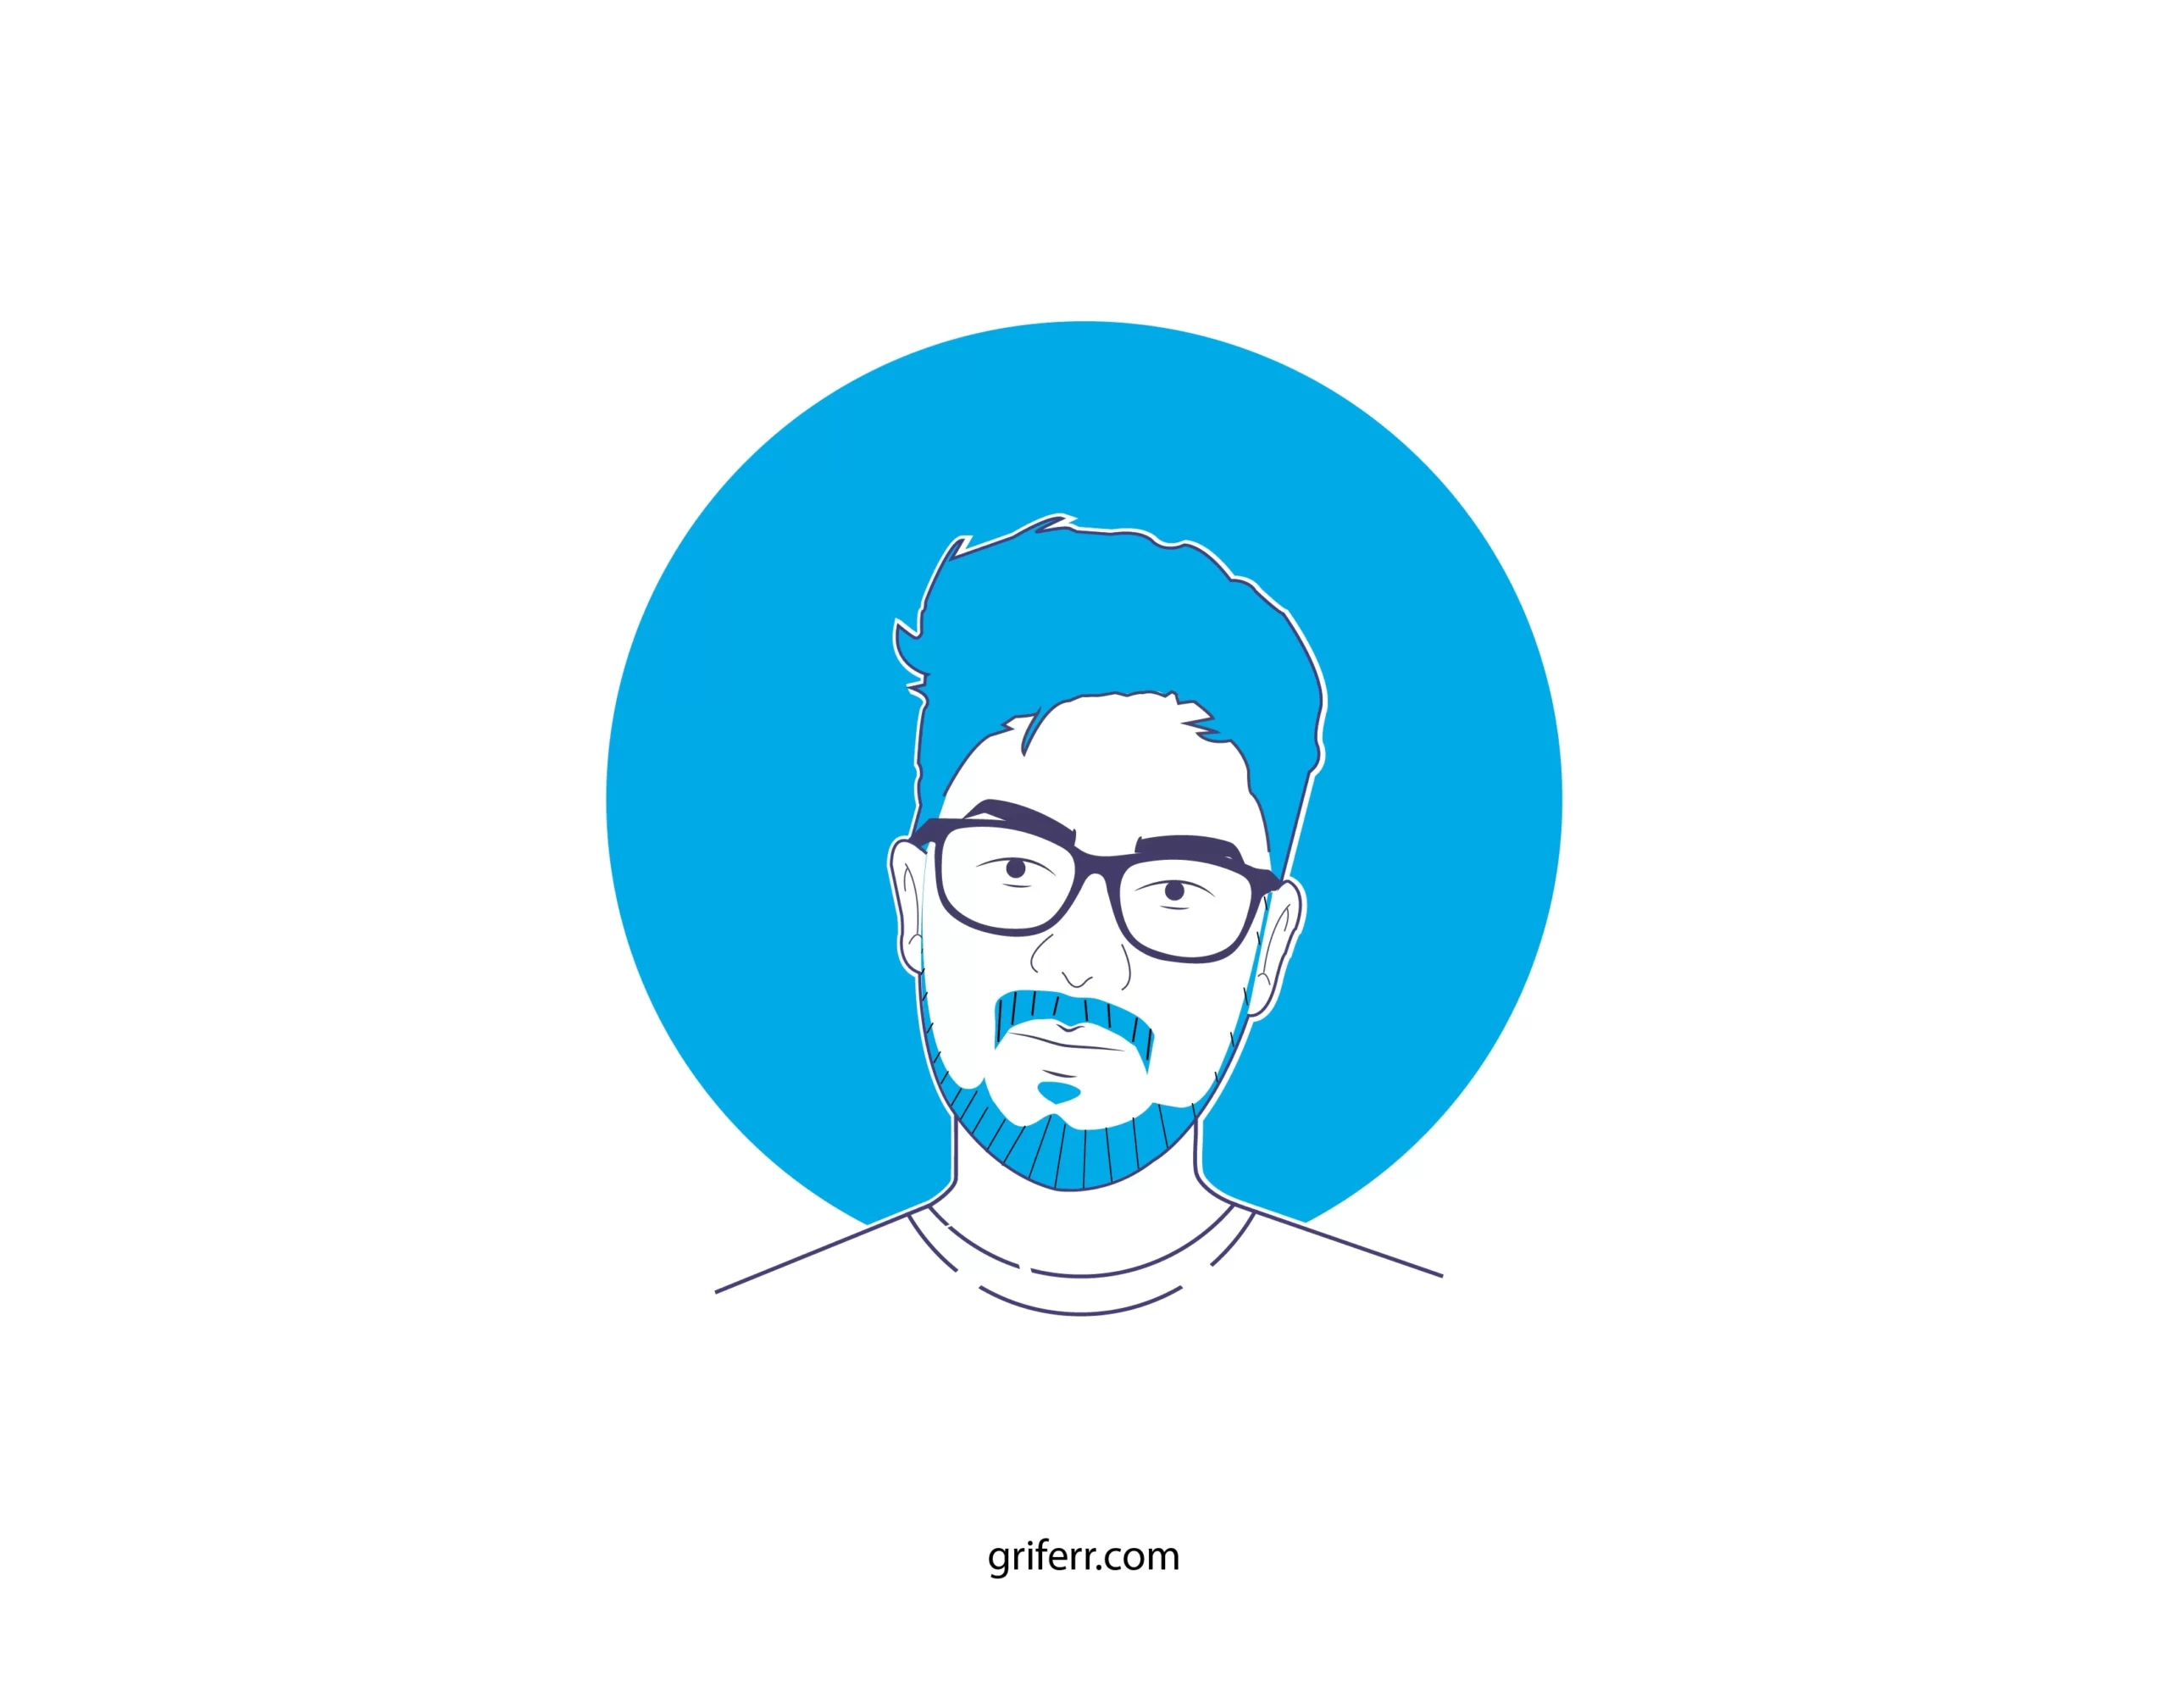 Outline portrait design of a bearded man in cool glasses, sporting a stylish t-shirt.